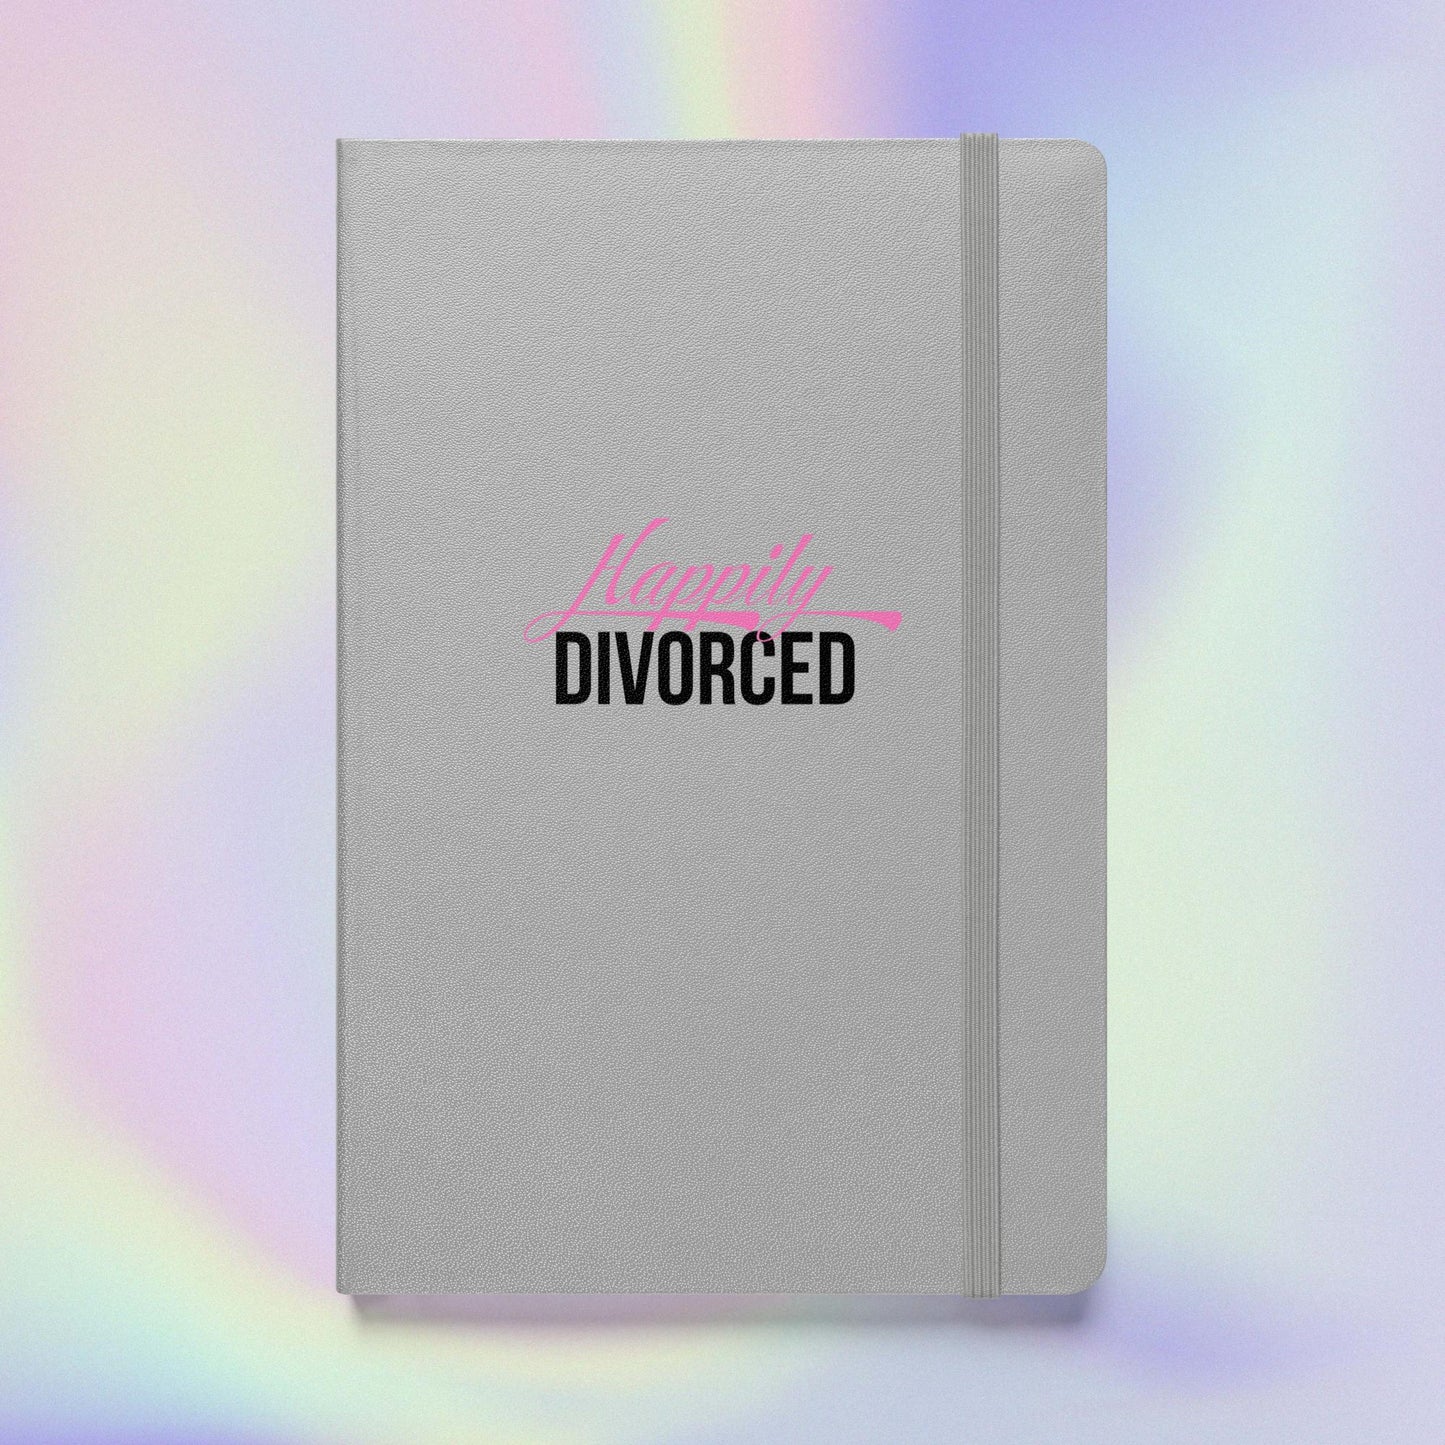 Happily Divorced: Hardcover bound notebook